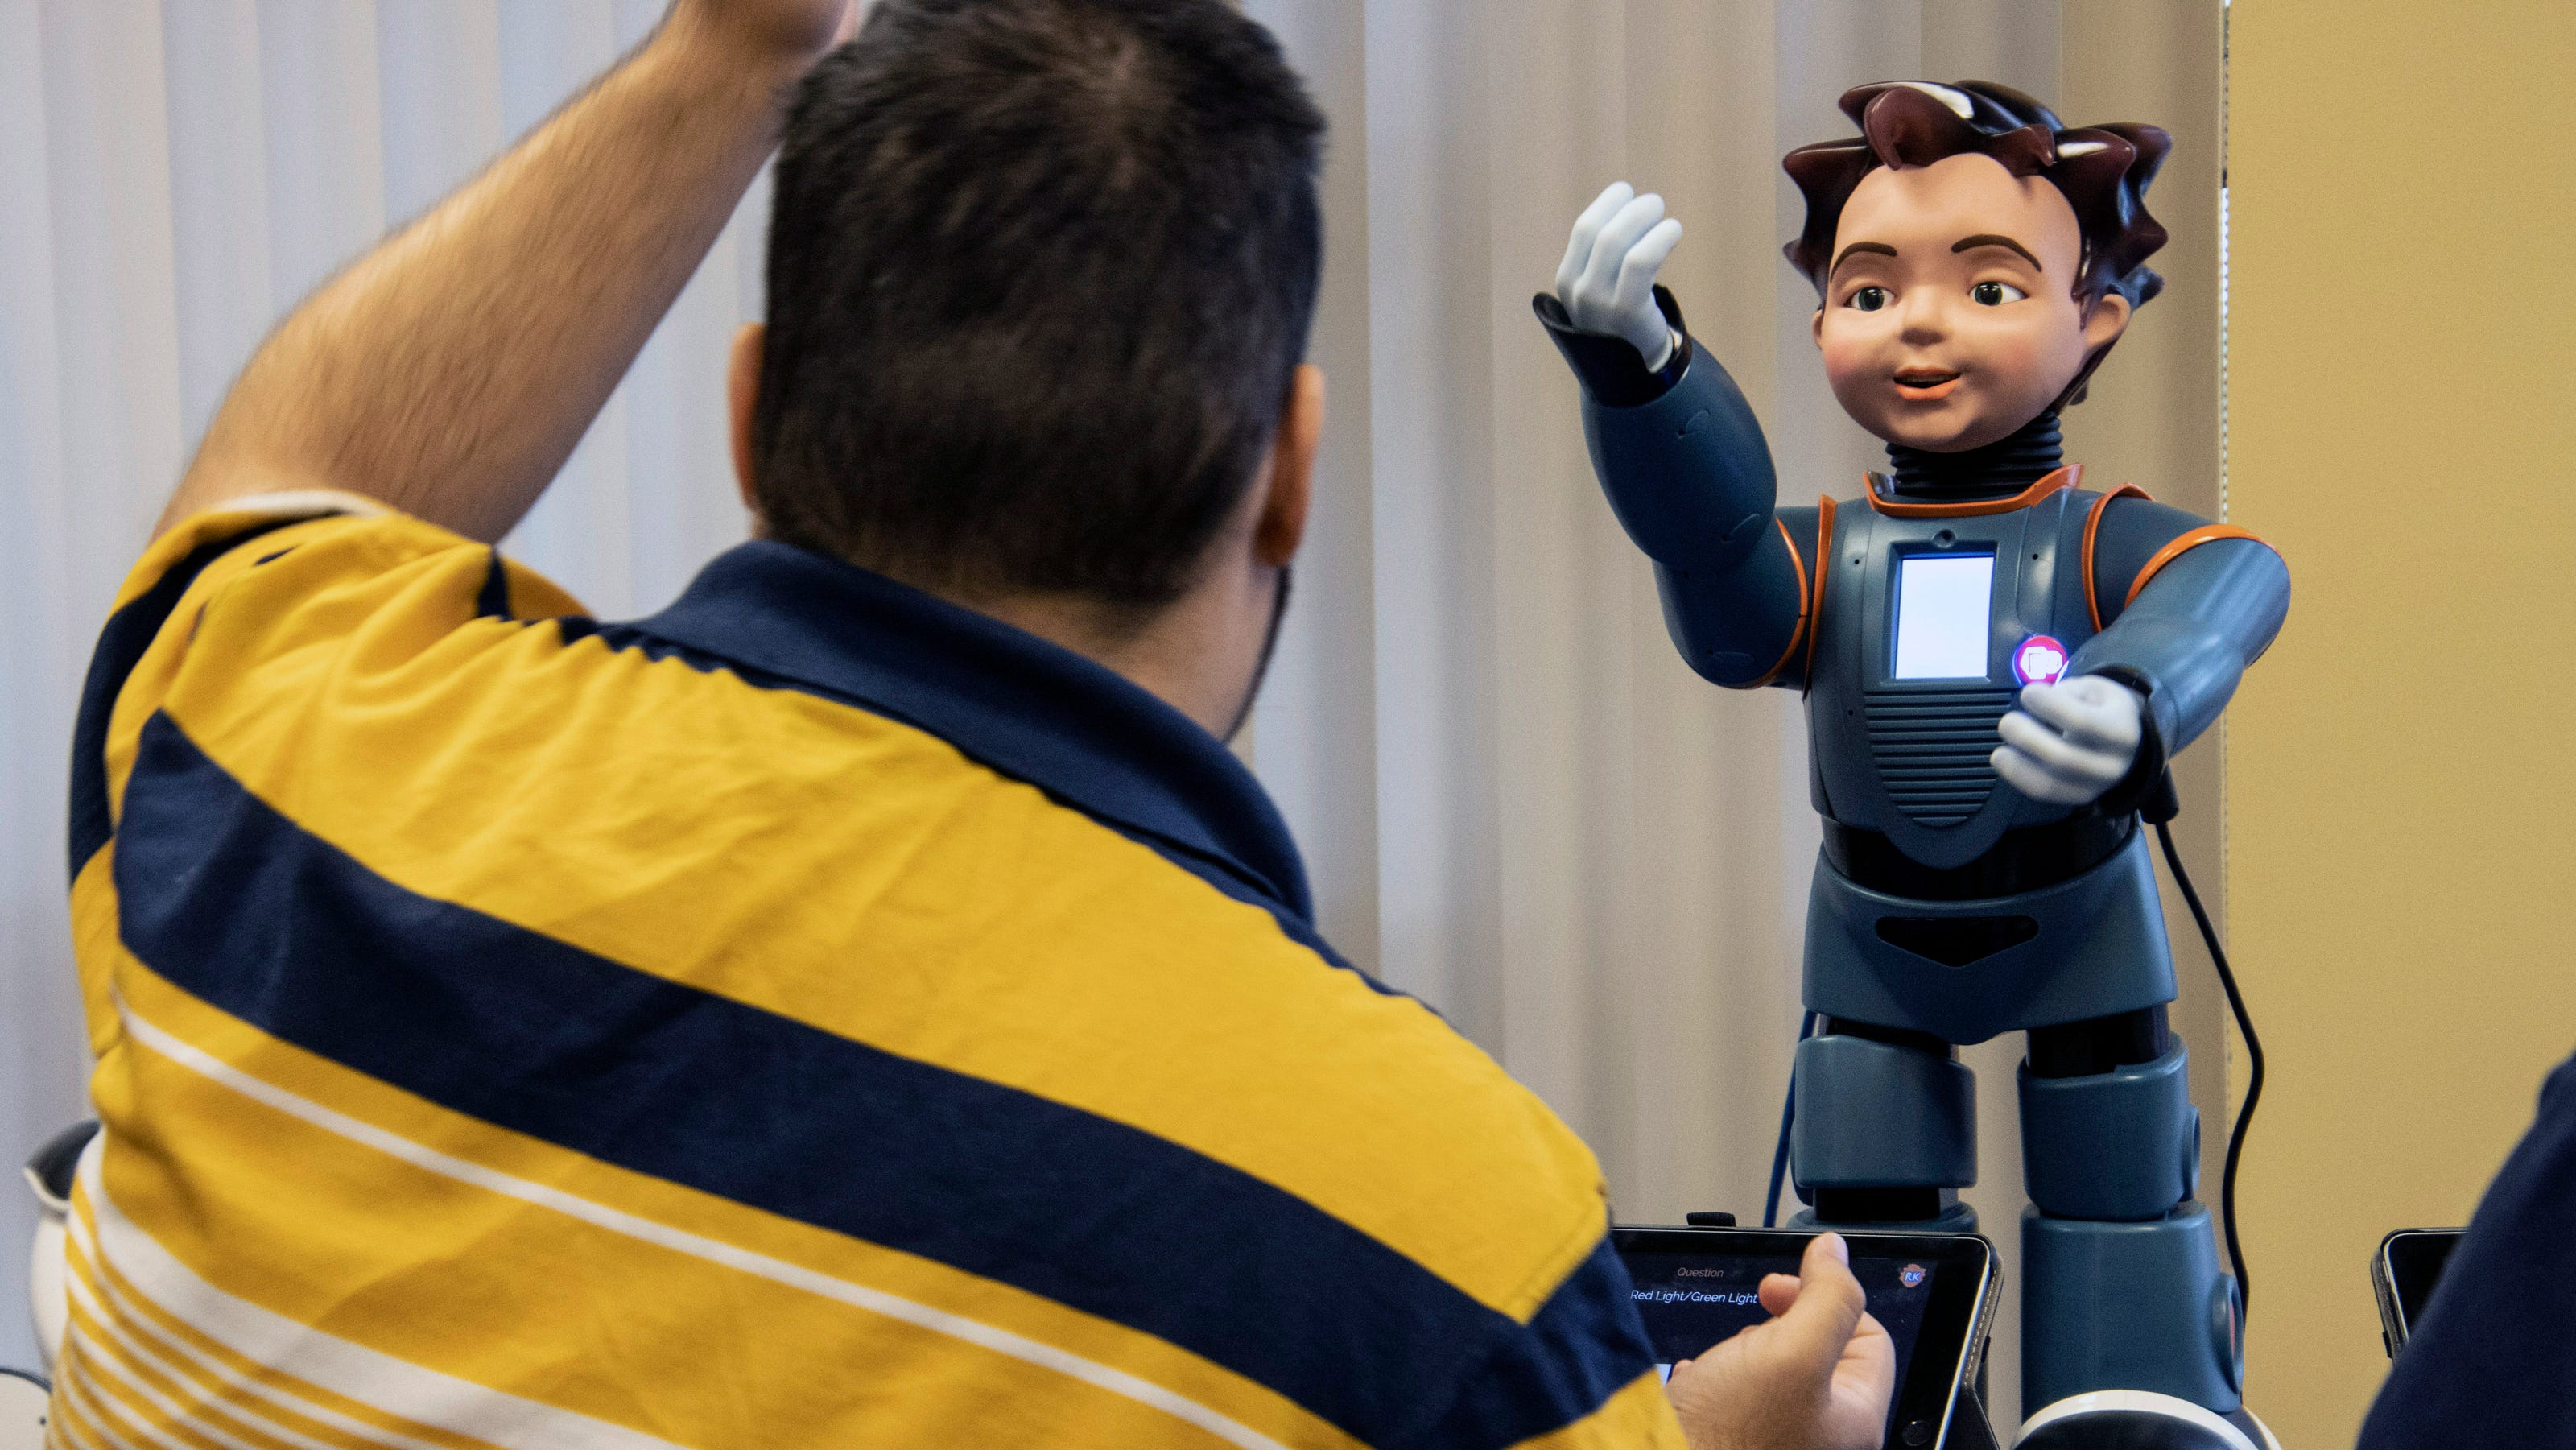 Autism patients are using robots learn communication skills